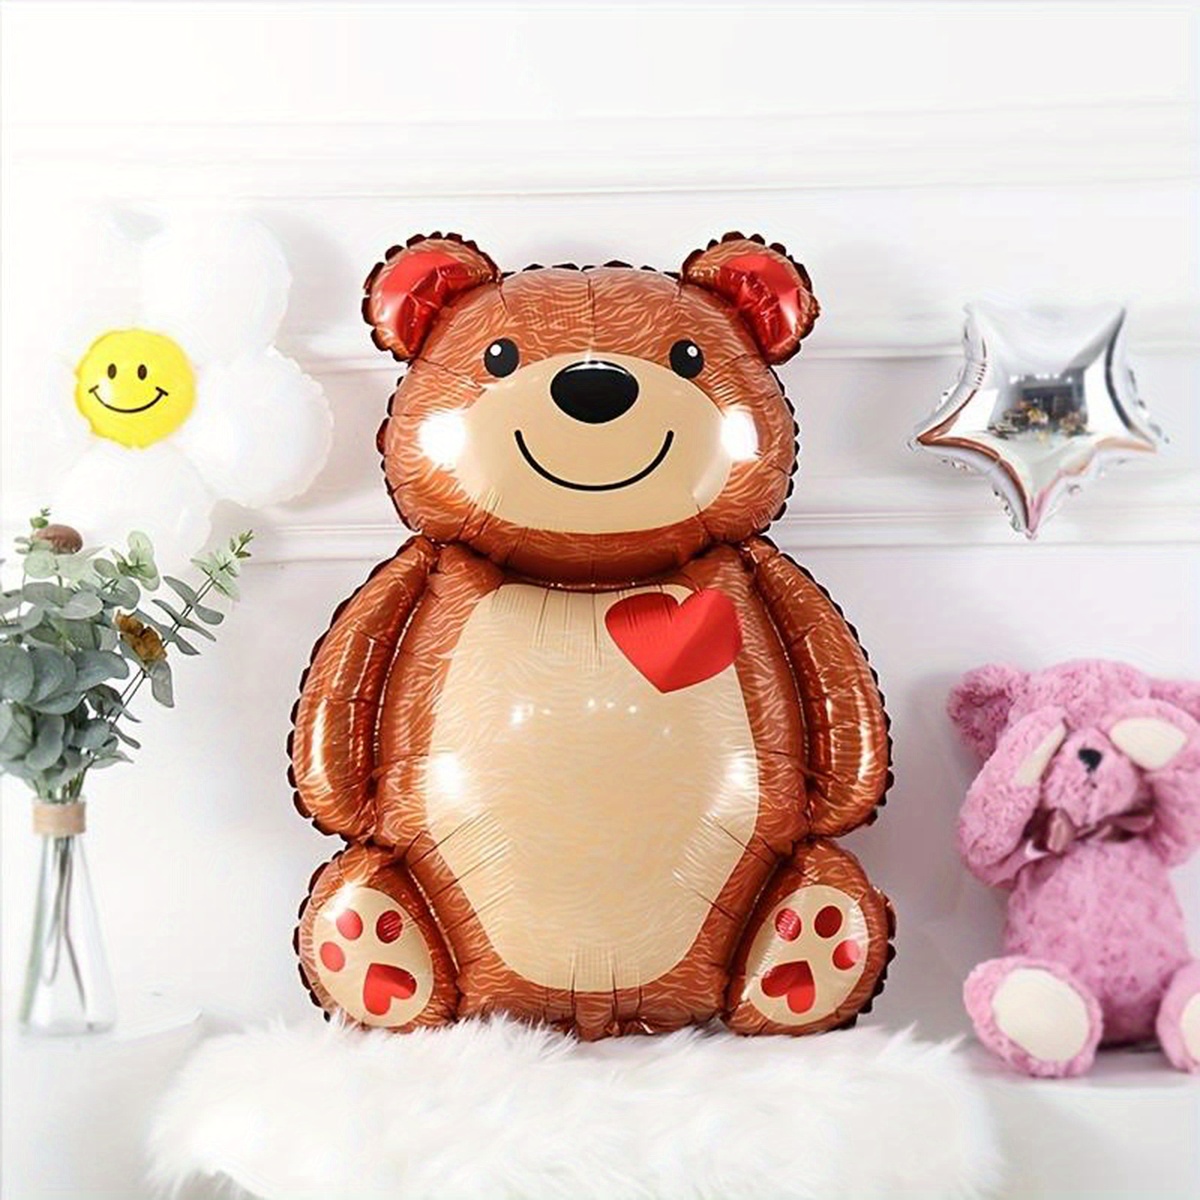 18Pcs Care cute Bear Balloon Party Decorations 3 Styles Colorful Care cute  bear Themed Latex Balloons Bunch for Boys Girls Birthday Bear Inc Party